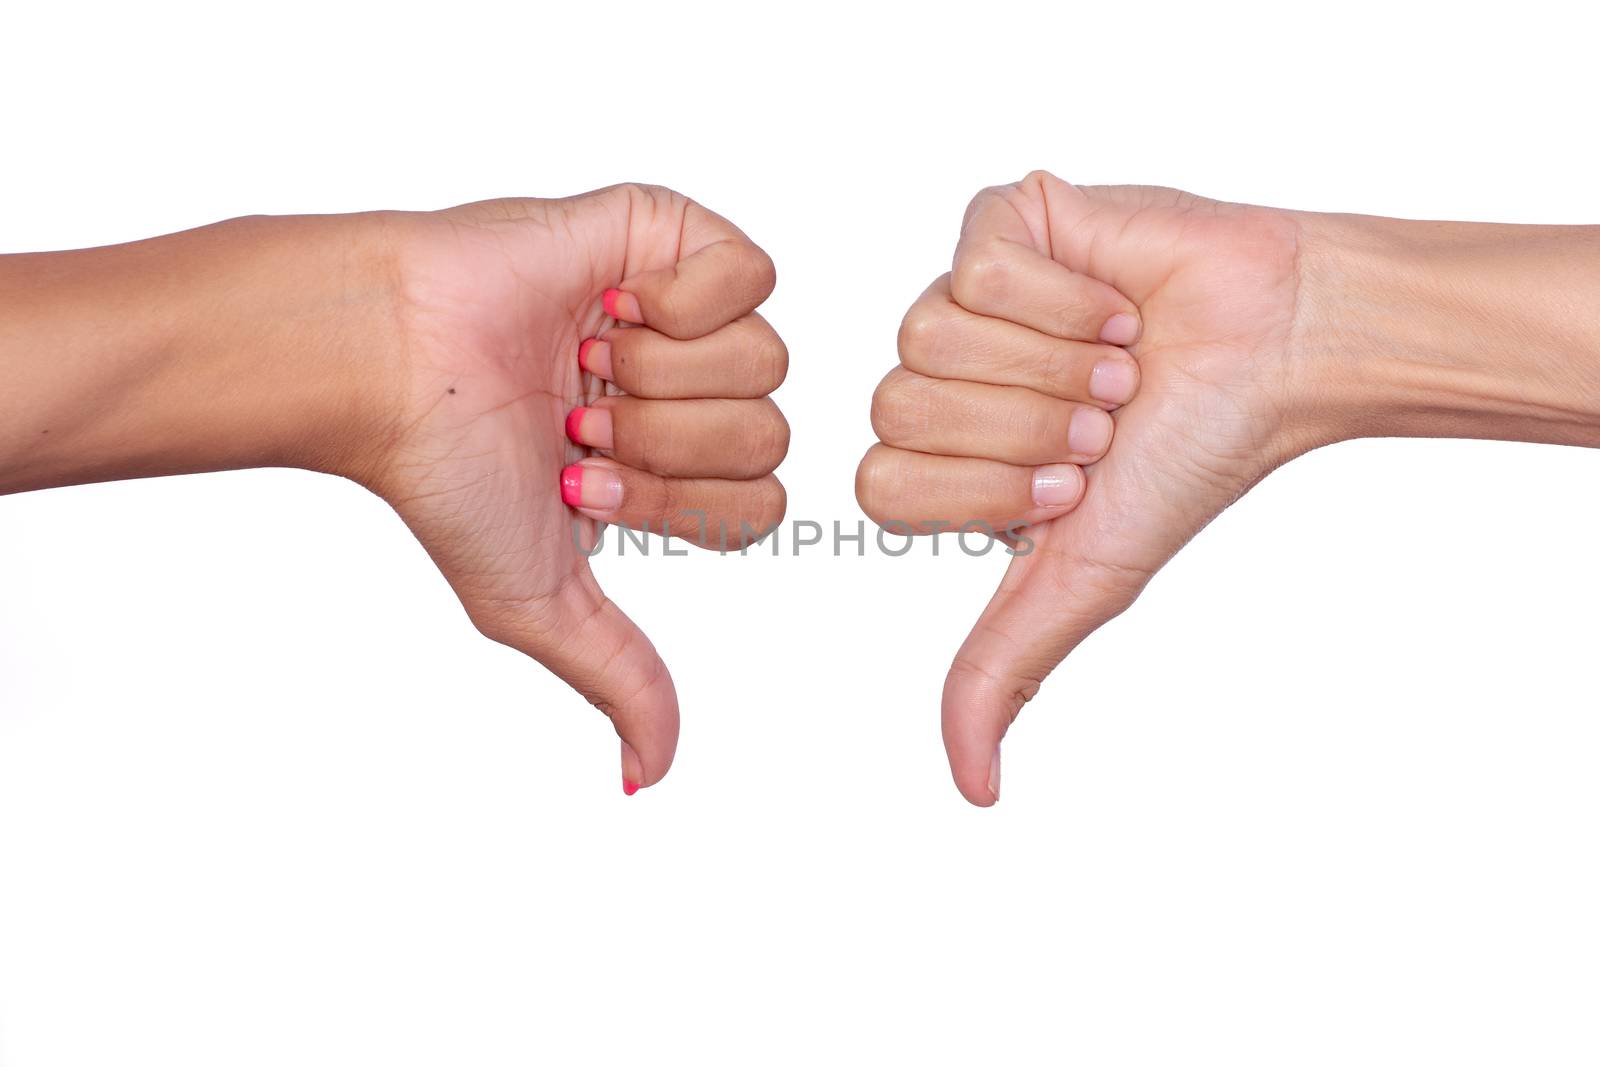 Female hands making signals with the thumb down